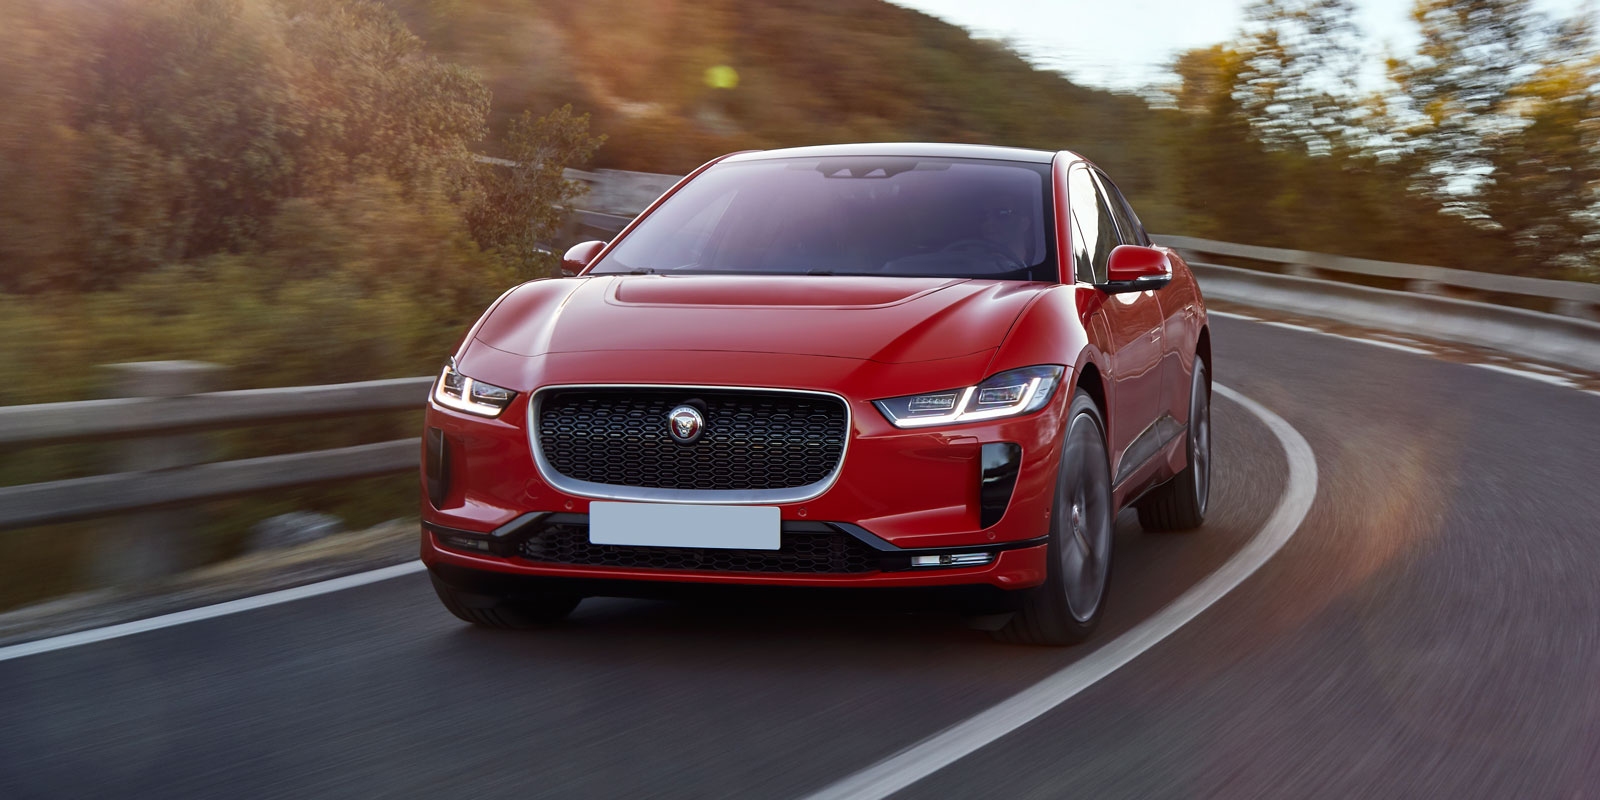 2018 Jaguar I-Pace electric SUV price, specs and release 